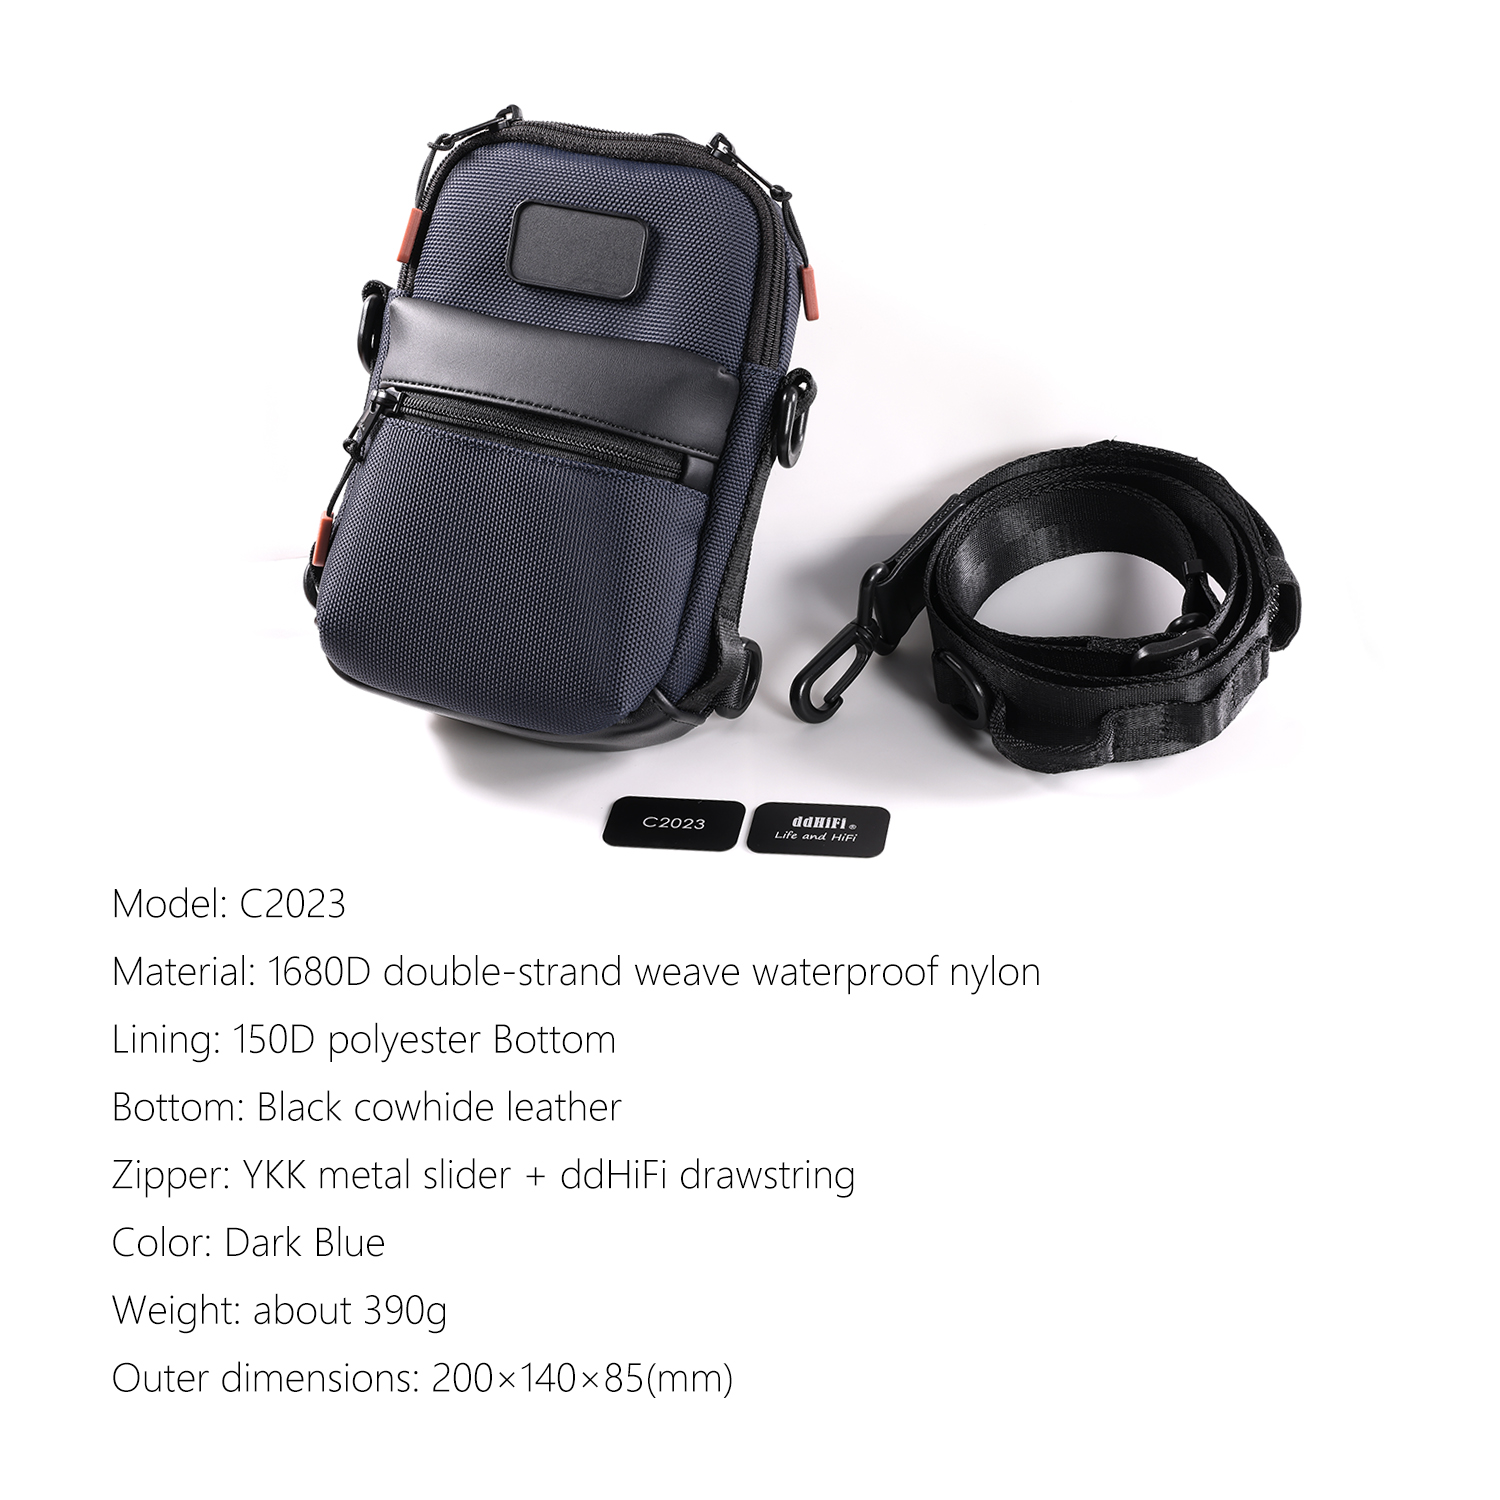 DD ddHiFi C2023 specifications: 1680D double-strand weave waterproof nylon, 390 g weight, and black cowhide leather